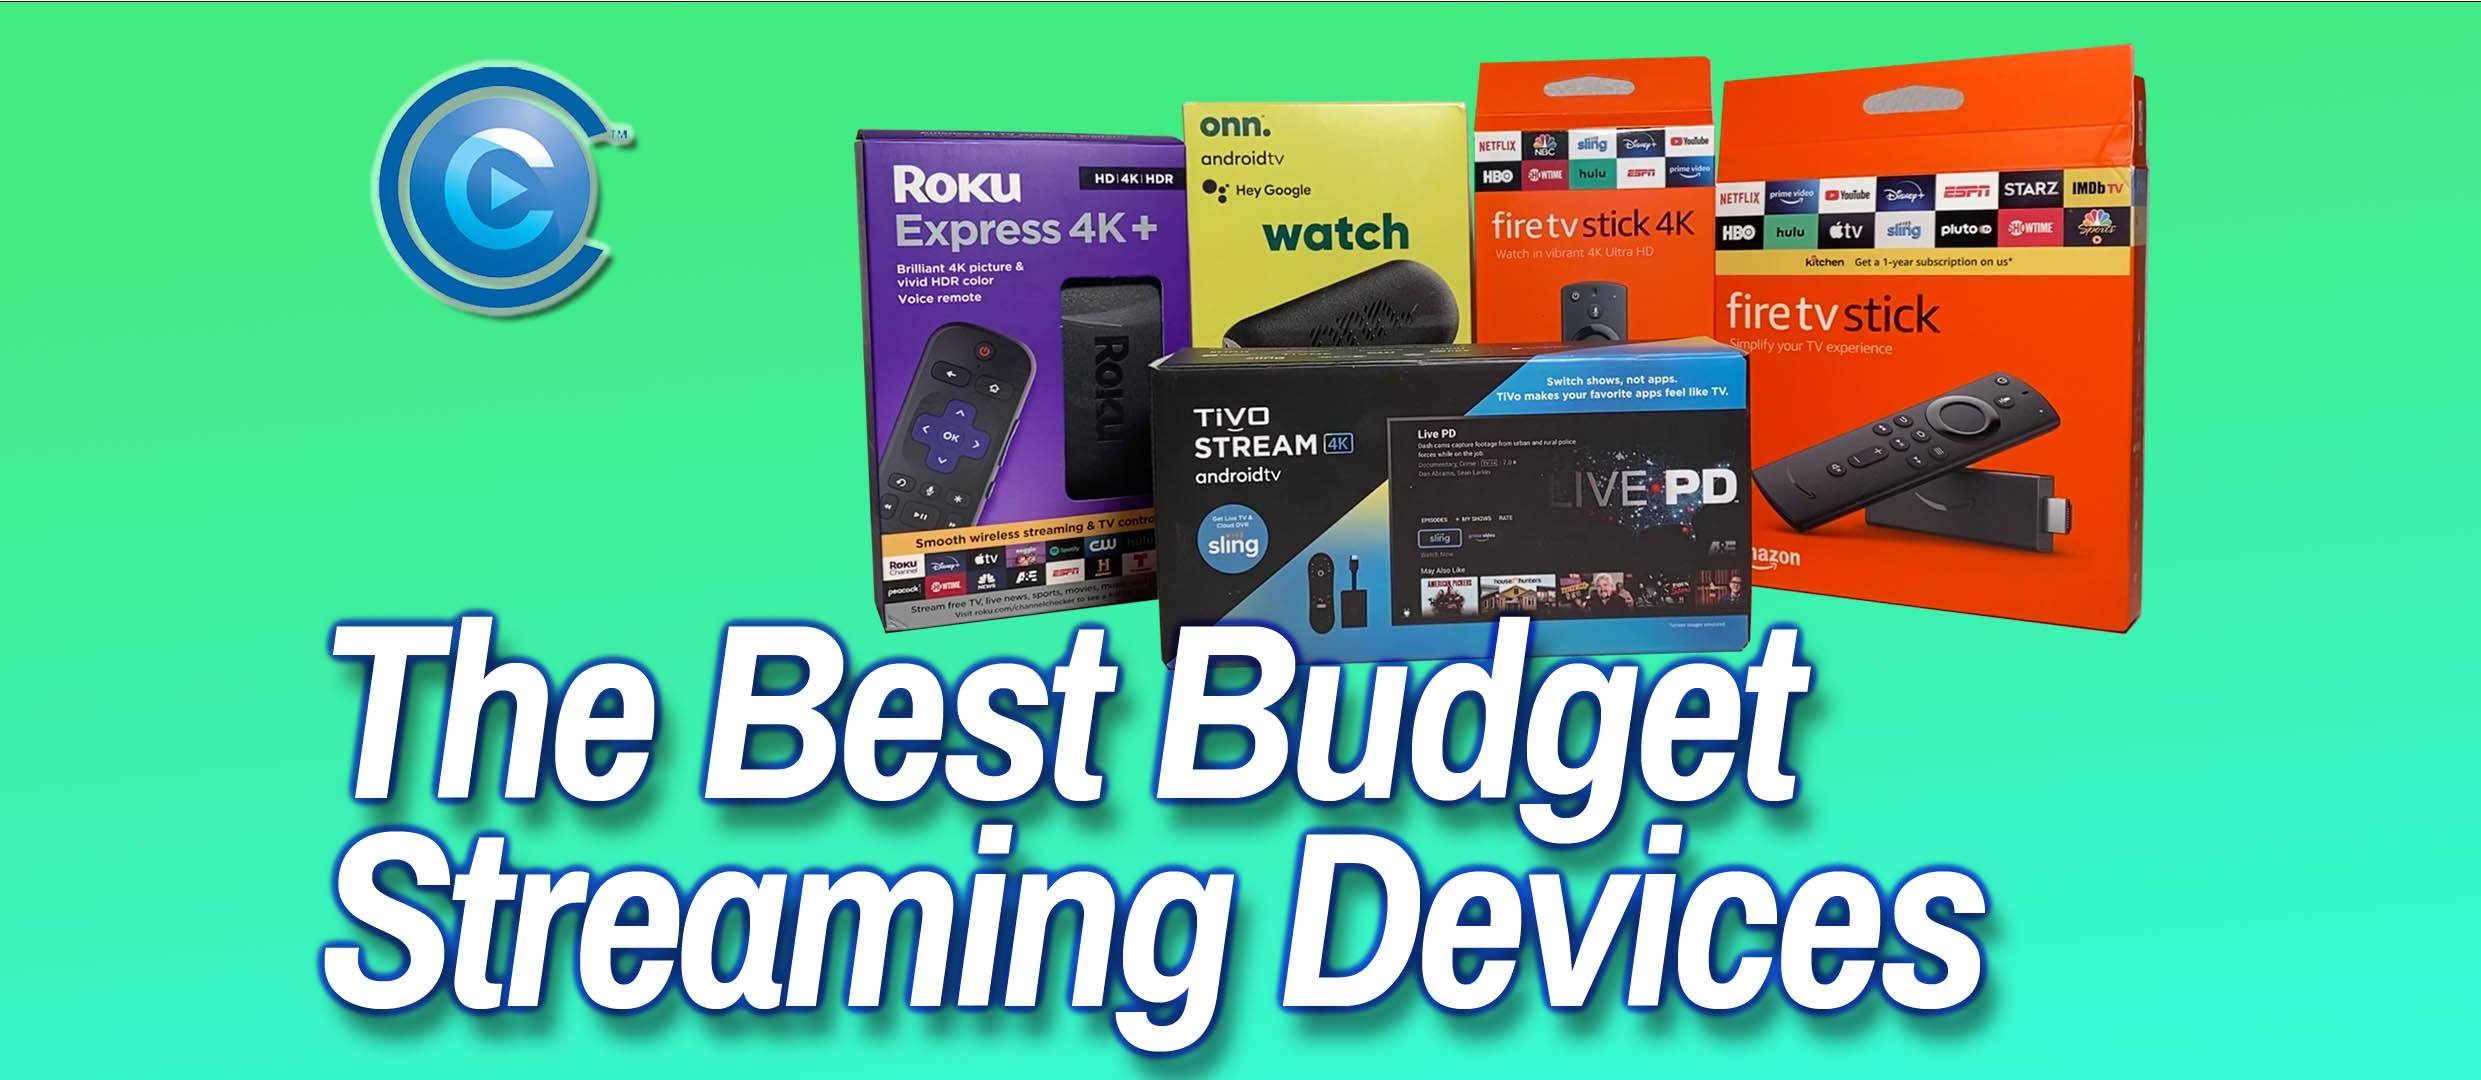 Site-The Best Budget Streaming Devices for 2021